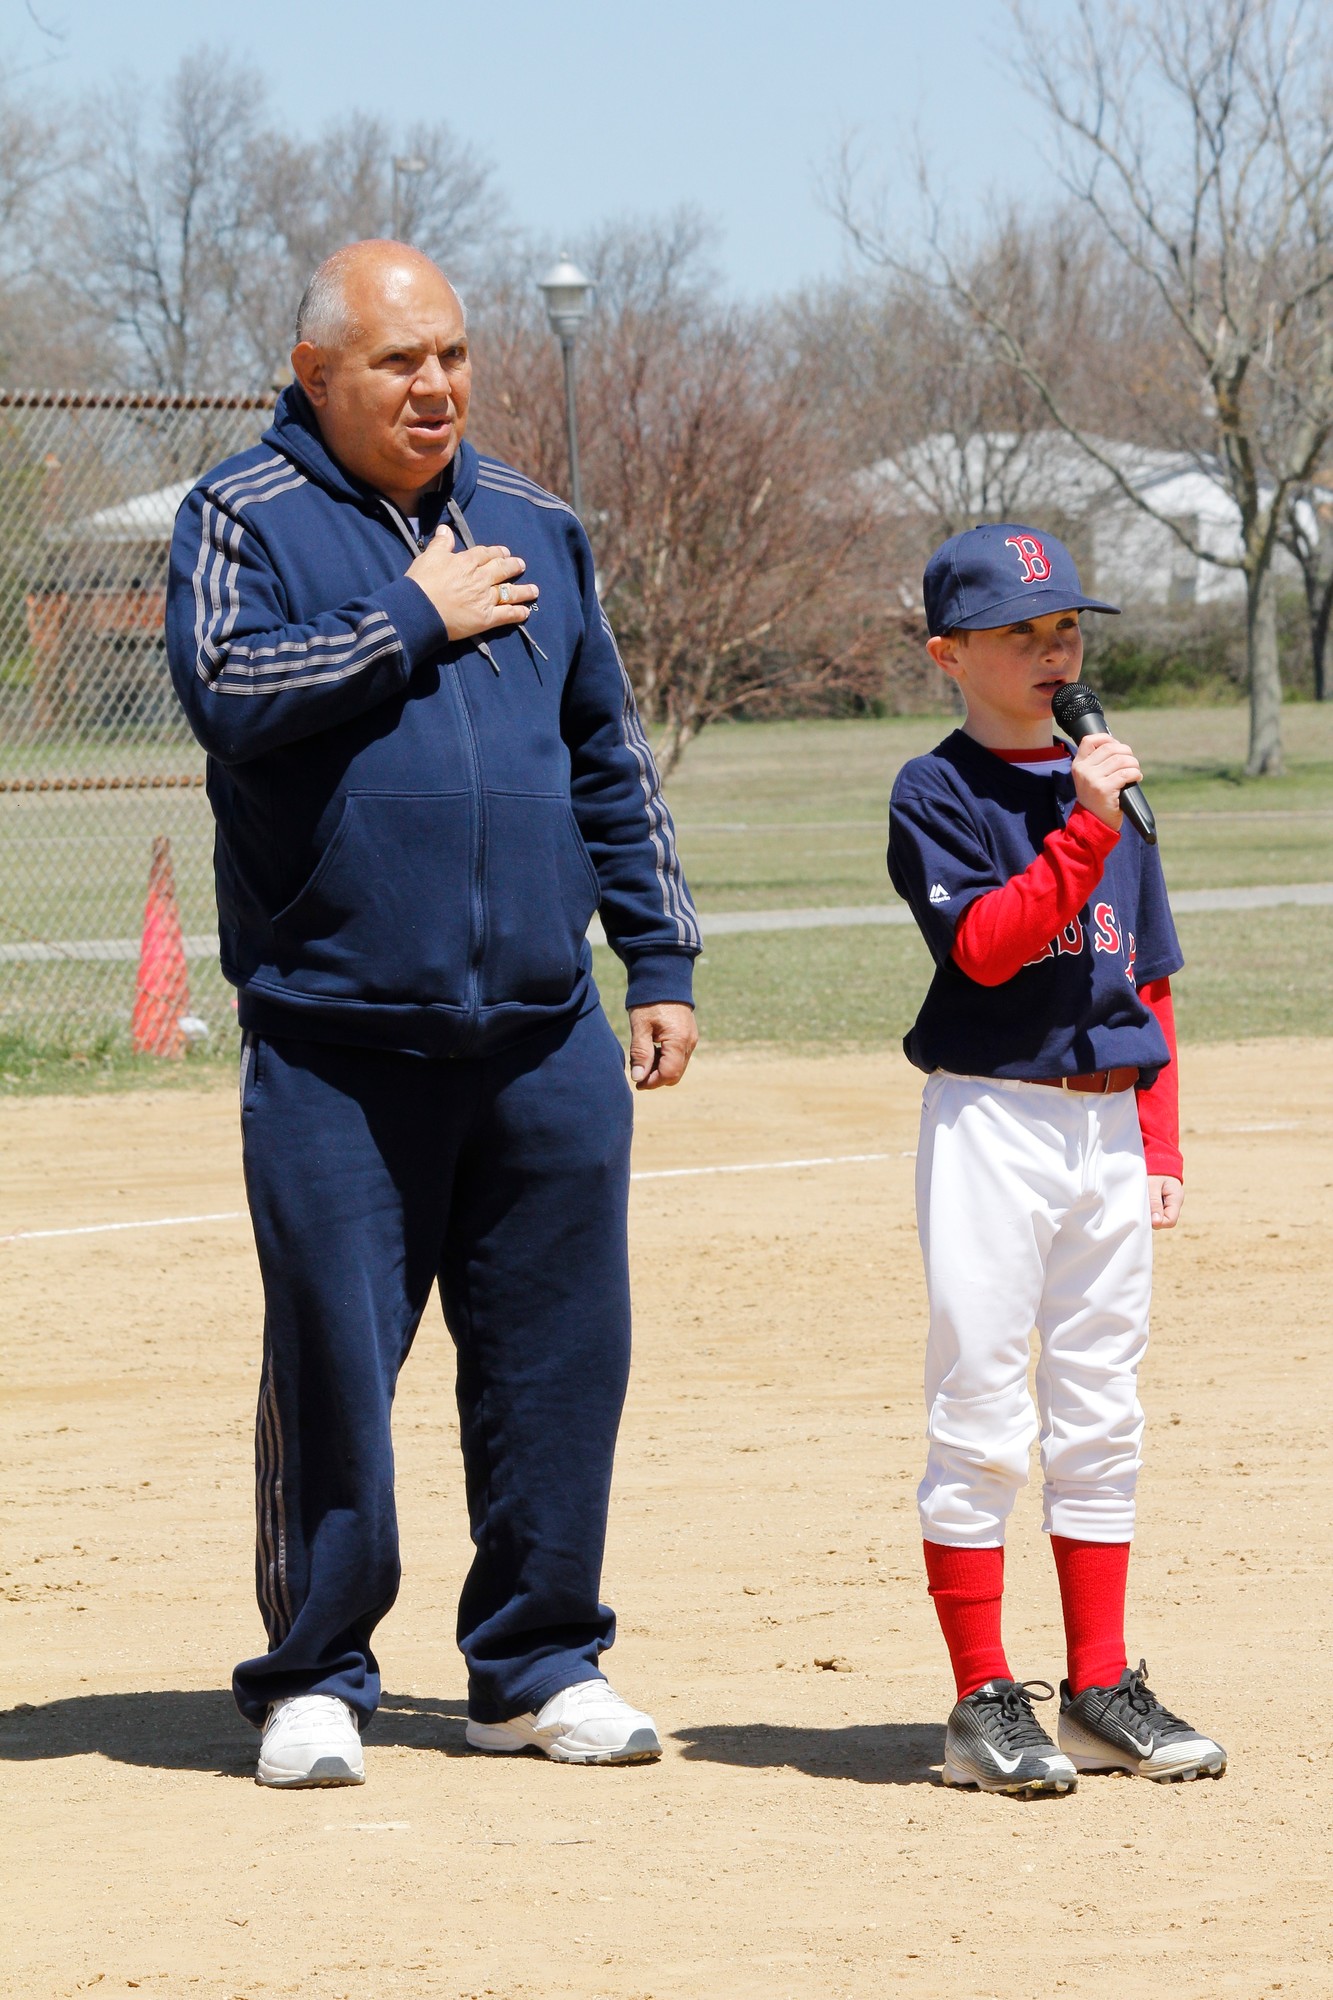 Sean Maddi, of the Red Sox, led the Pledge of Allegiance as Little League President Dee Cruz looked on.